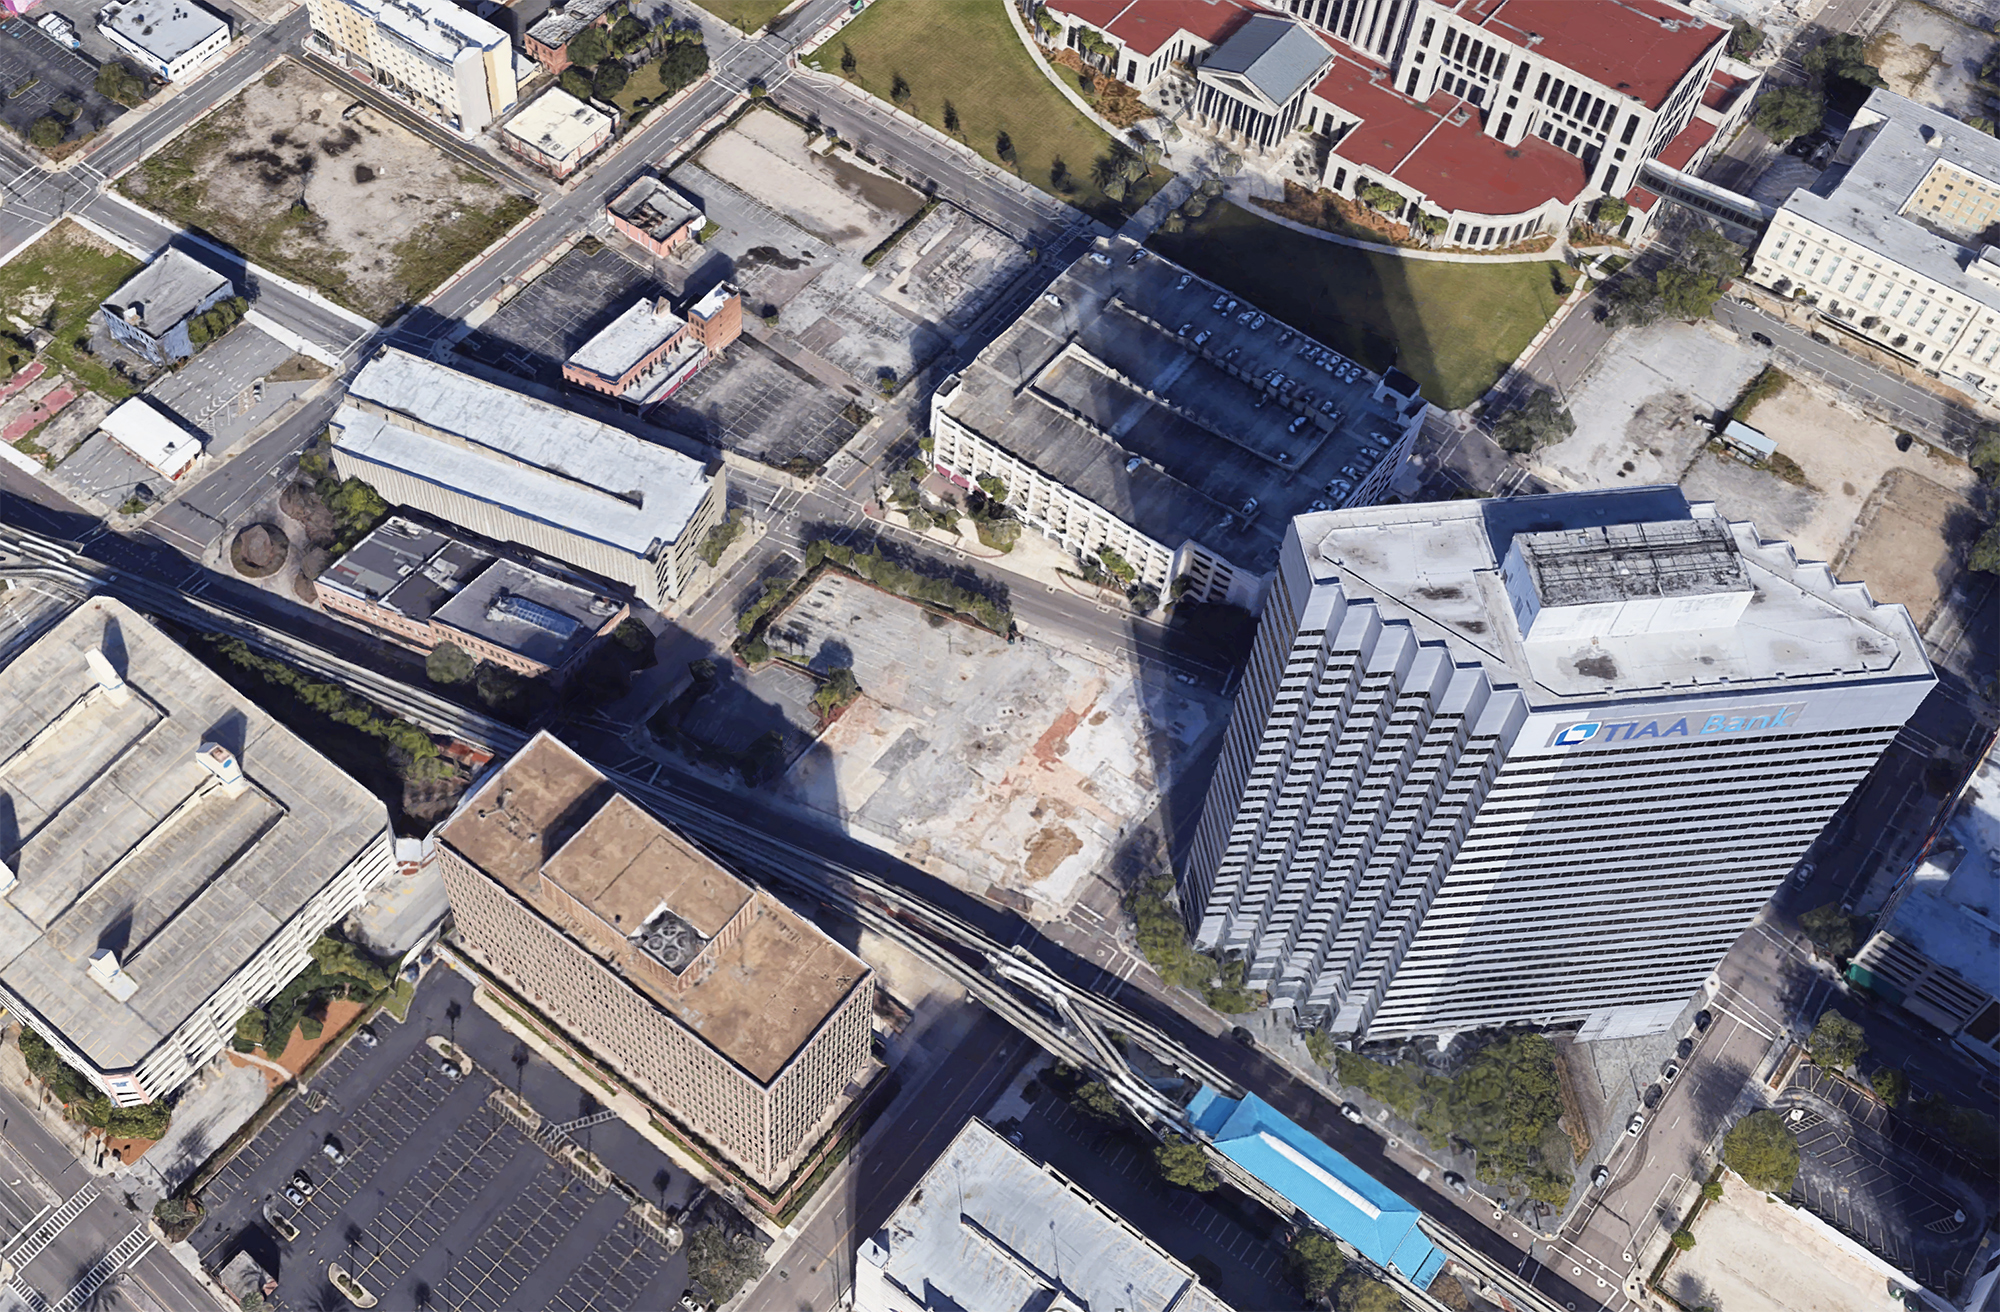 A Google satellite image shows a vacant lot at 10 N. Pearl St. near the TIAA Bank Center where Greyhound previously had a station. The station was demolished and the area is now a parking lot. A 54-story building could rise there.